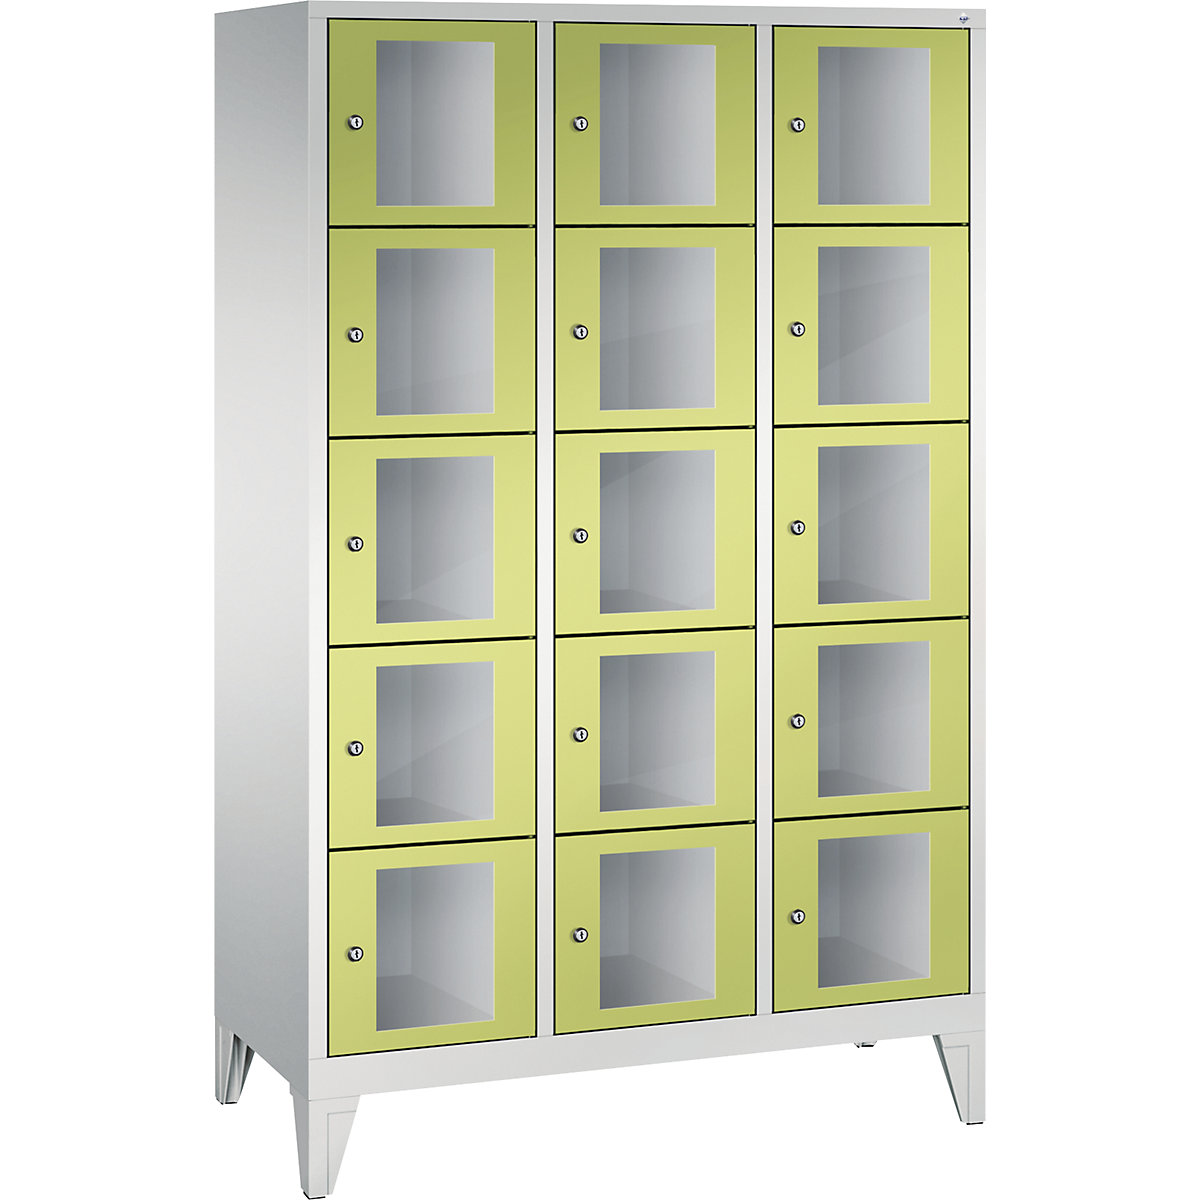 C+P – CLASSIC locker unit, compartment height 295 mm, with feet, 15 compartments, width 1200 mm, viridian green door